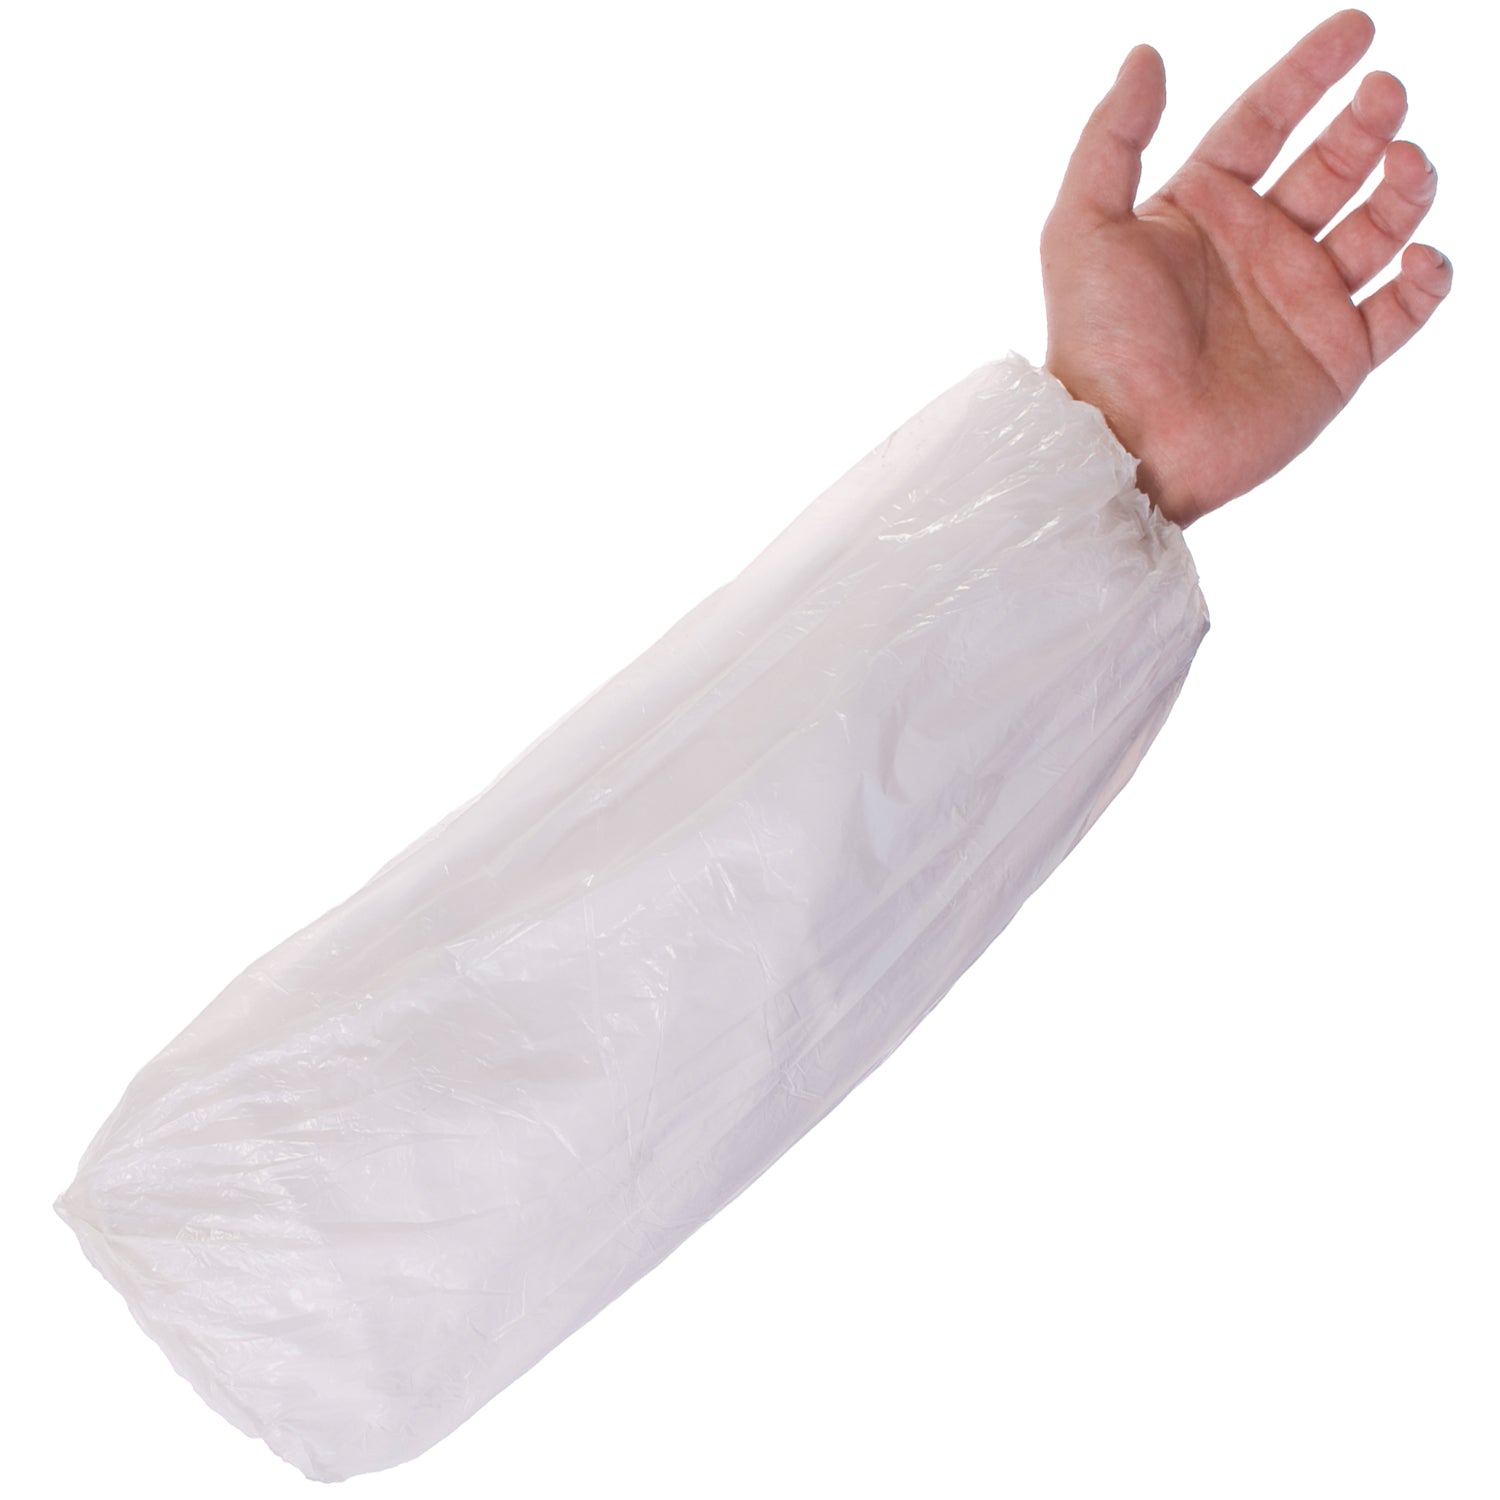 2000/Case) 18 Disposable Plastic Arm Sleeves 